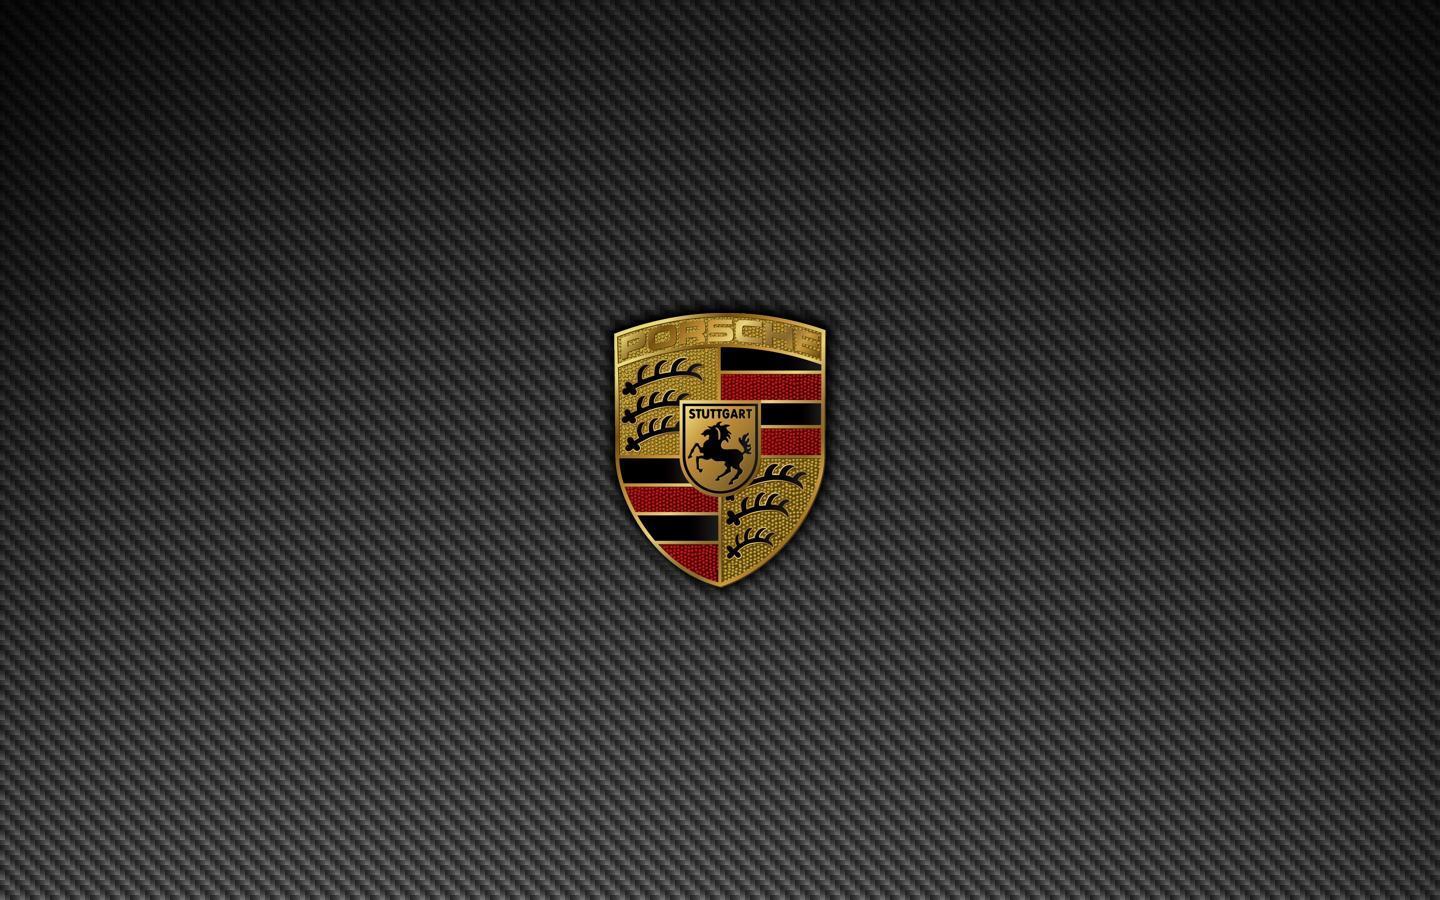 Porsche Returns to Simracing After 12 Years - The News Wheel